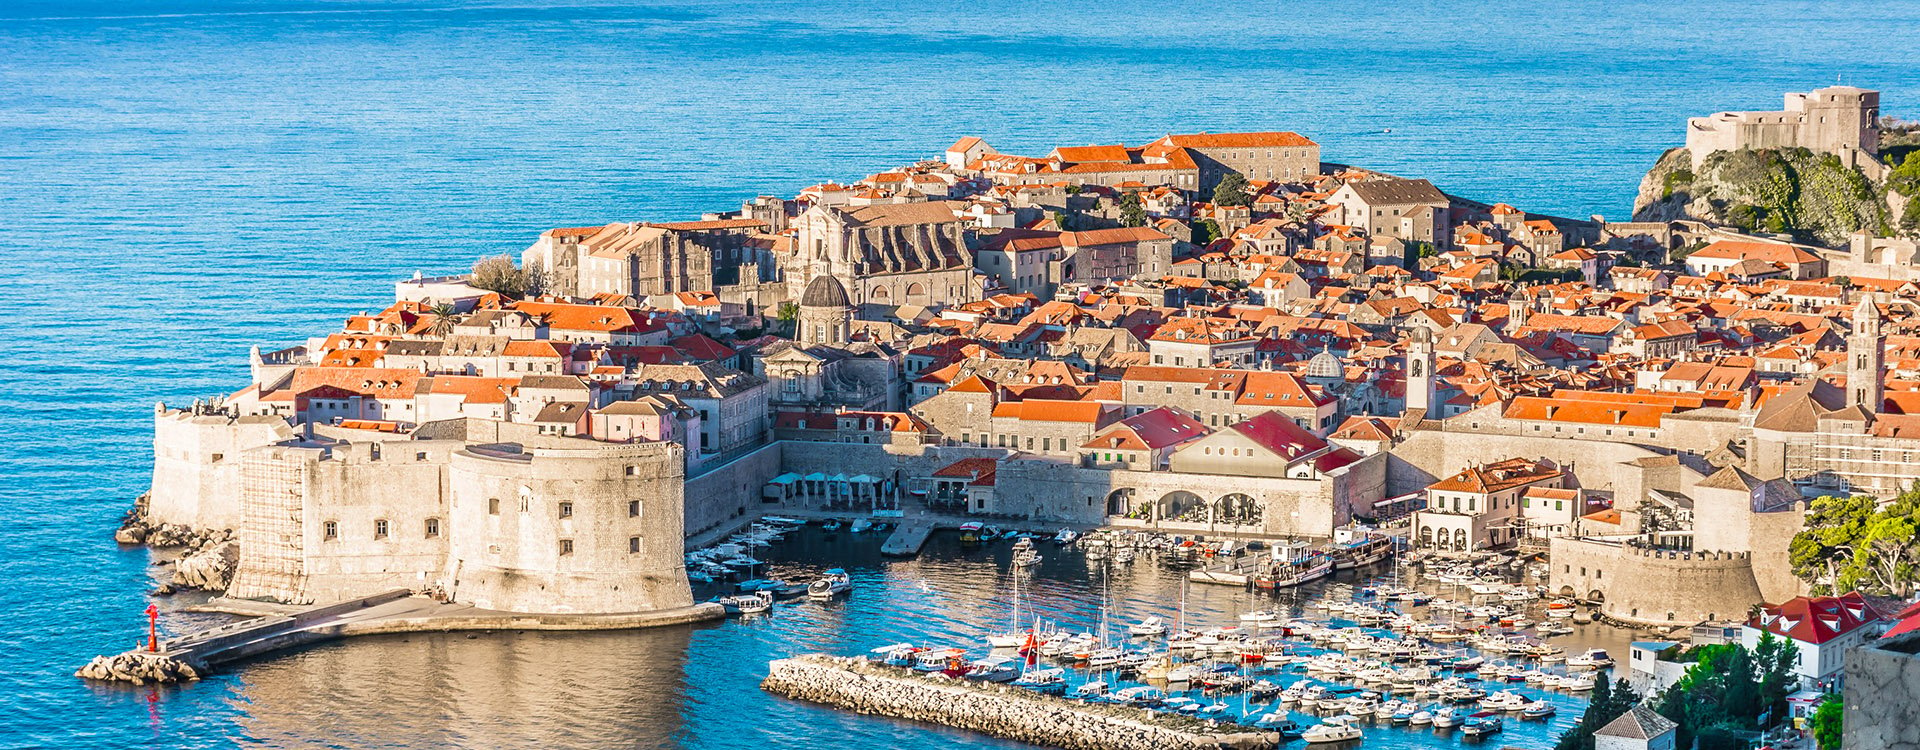 Aerial townscape of Dubrovnik city in Croatia